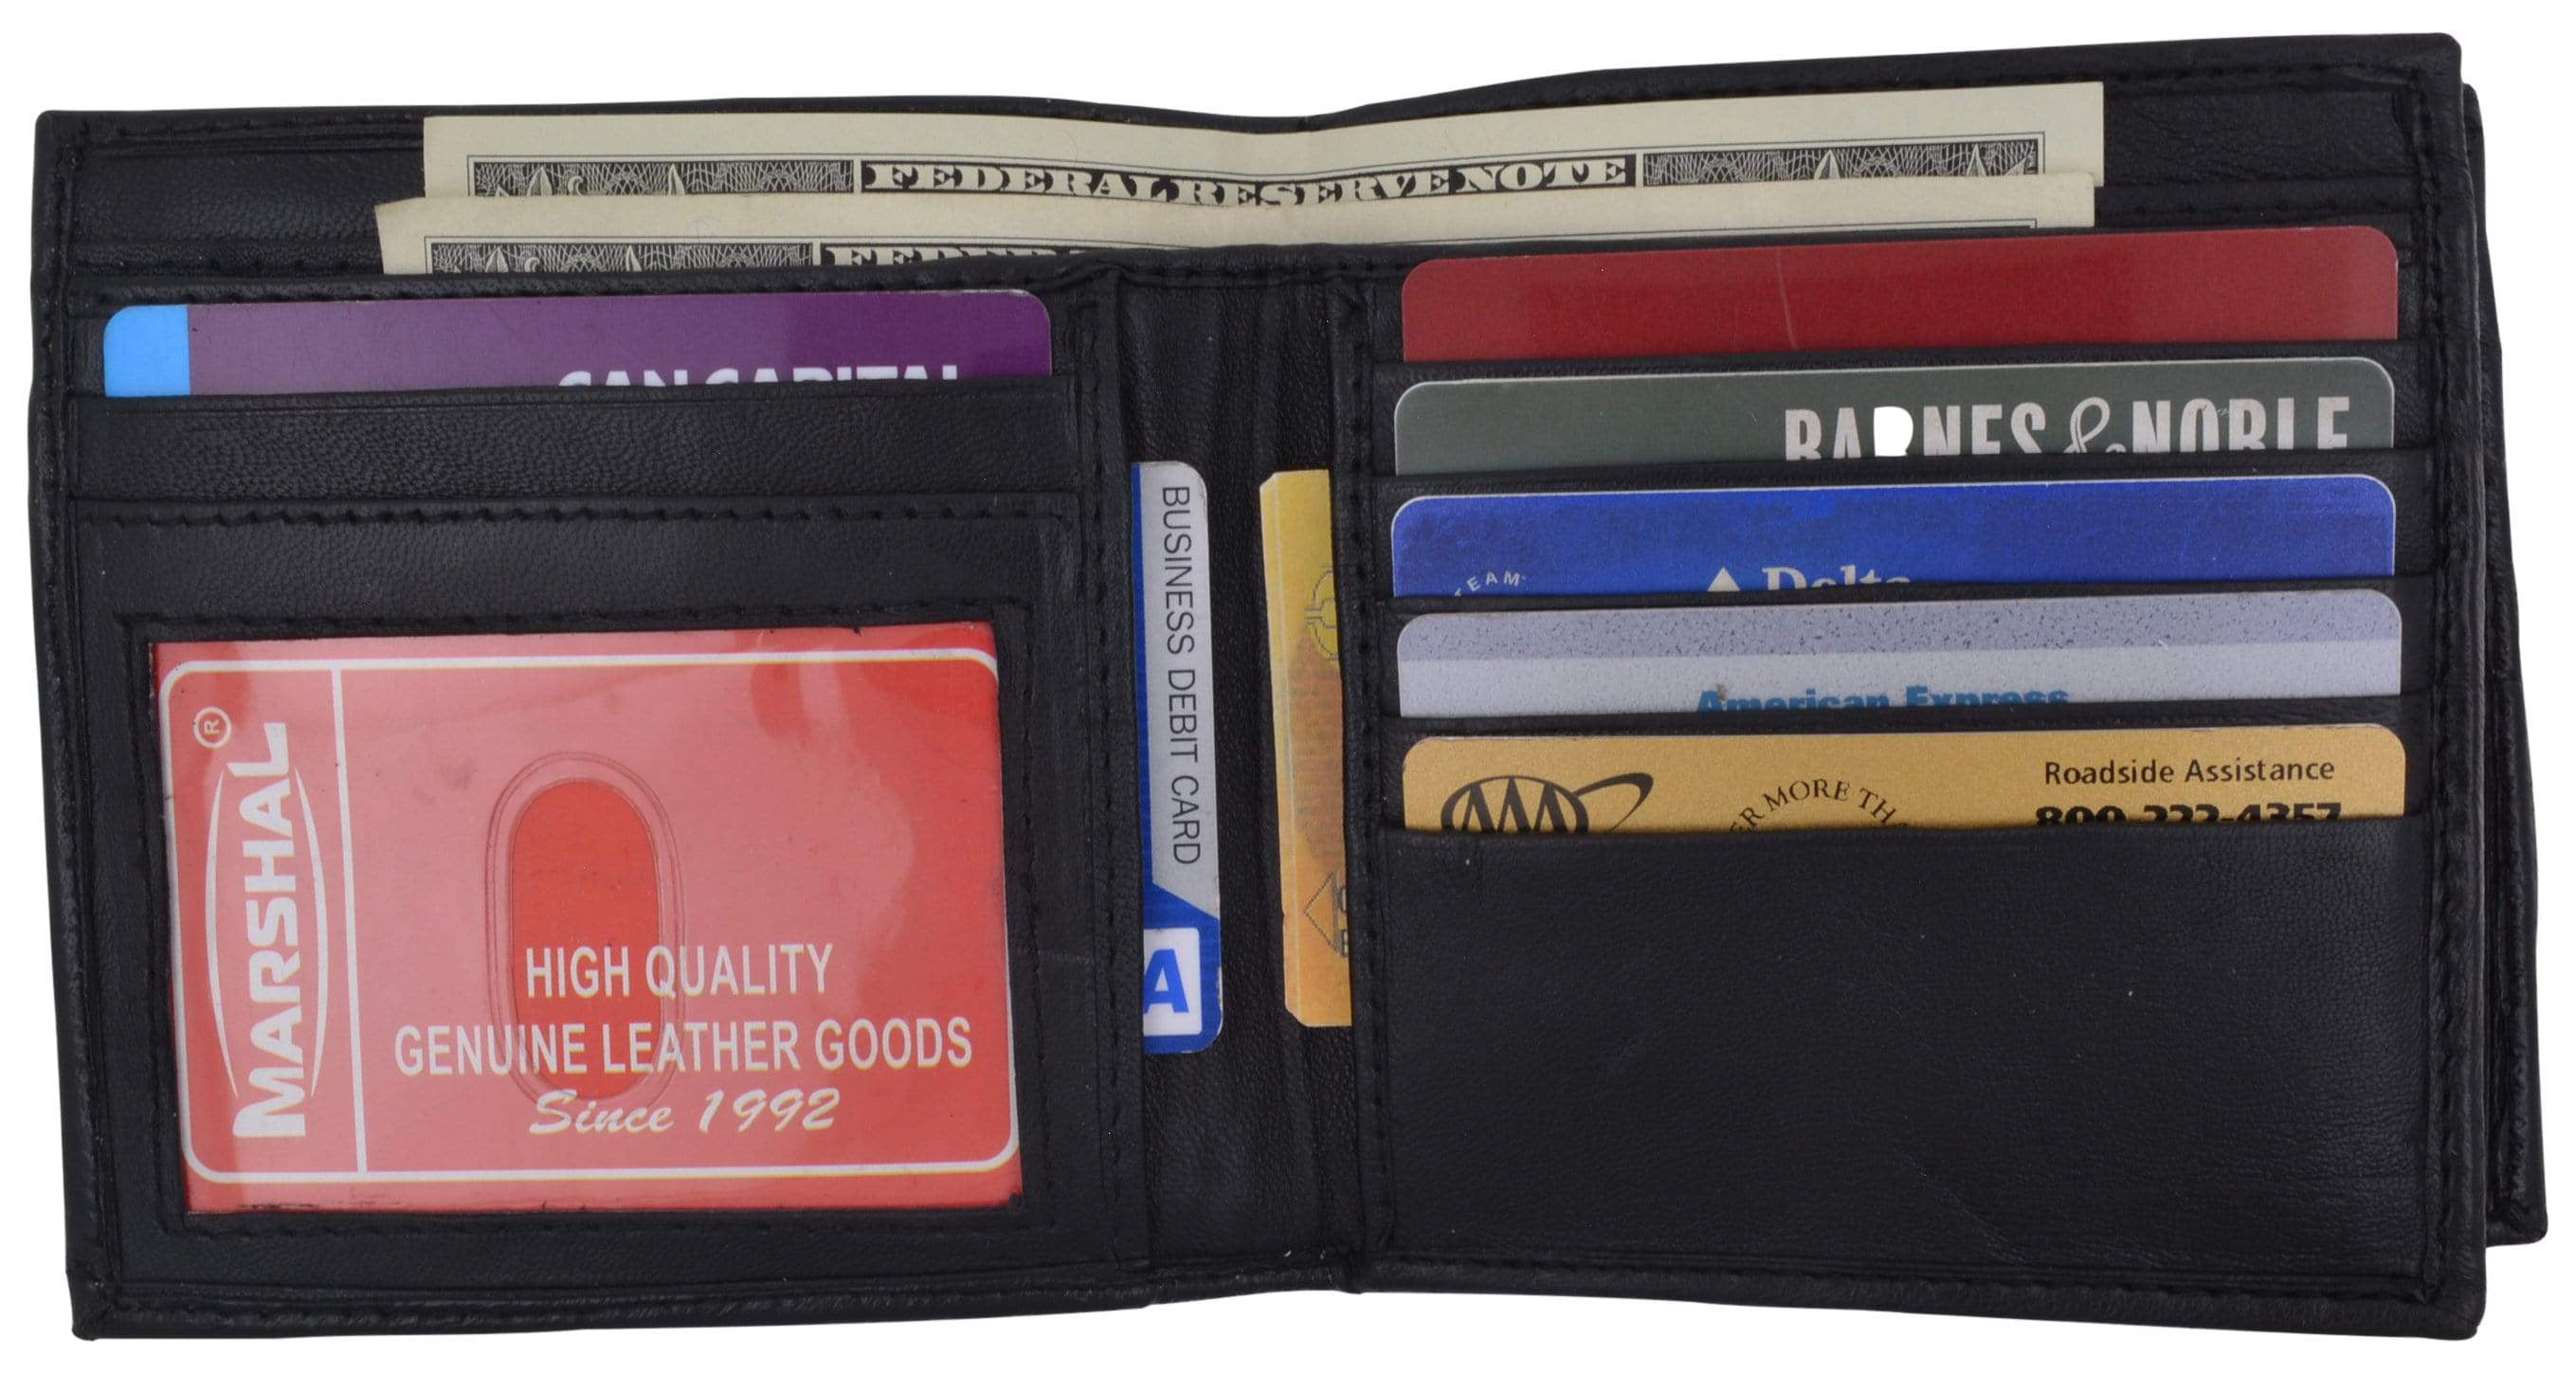 Leather Wallet – Local Boy Outfitters